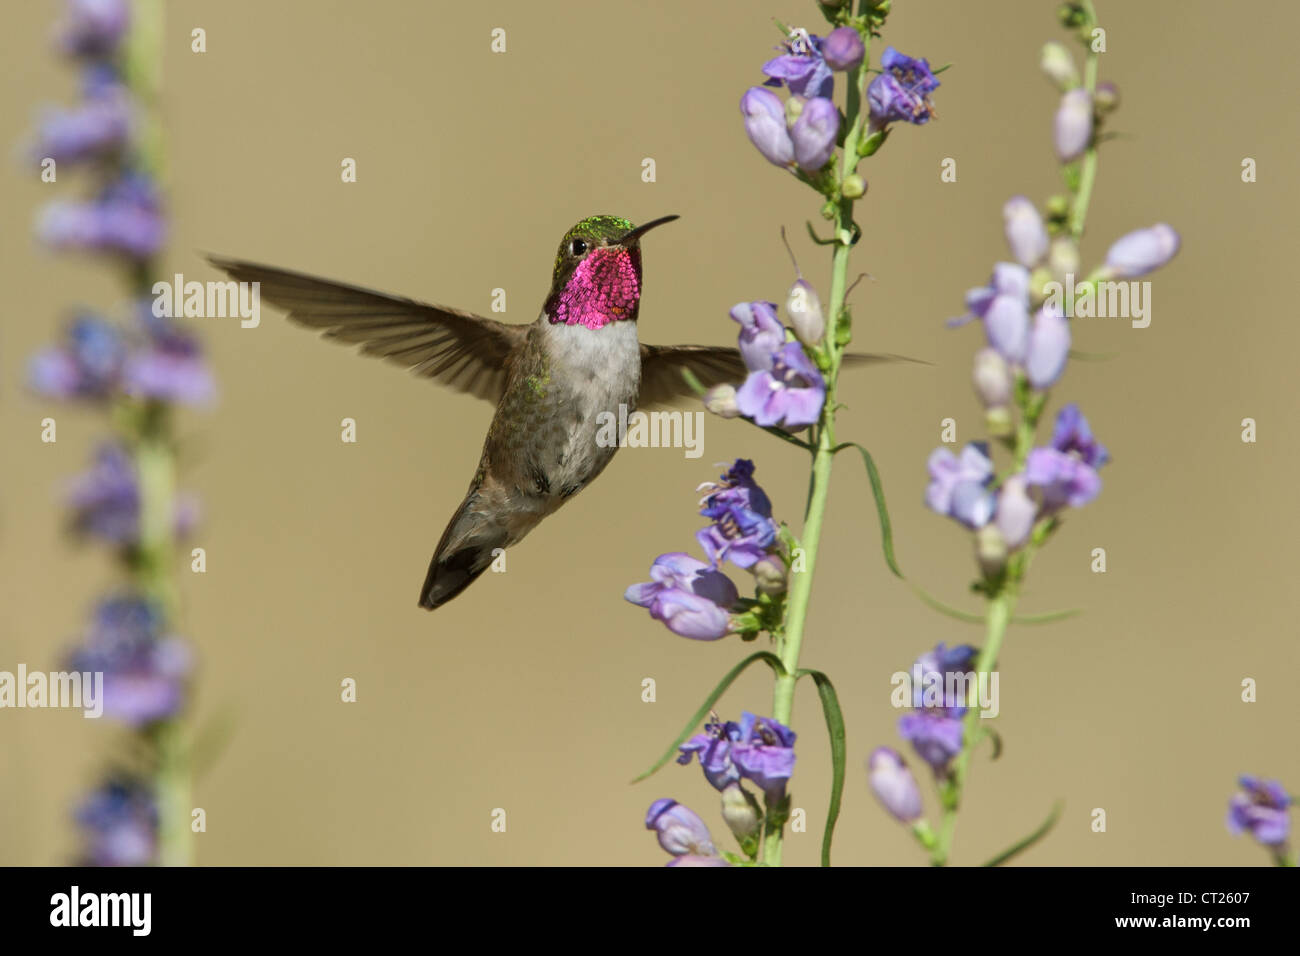 A Broad-tailed Hummingbird bird hovering in Penstemon flowers  blooms blossoms seeking nectar Stock Photo